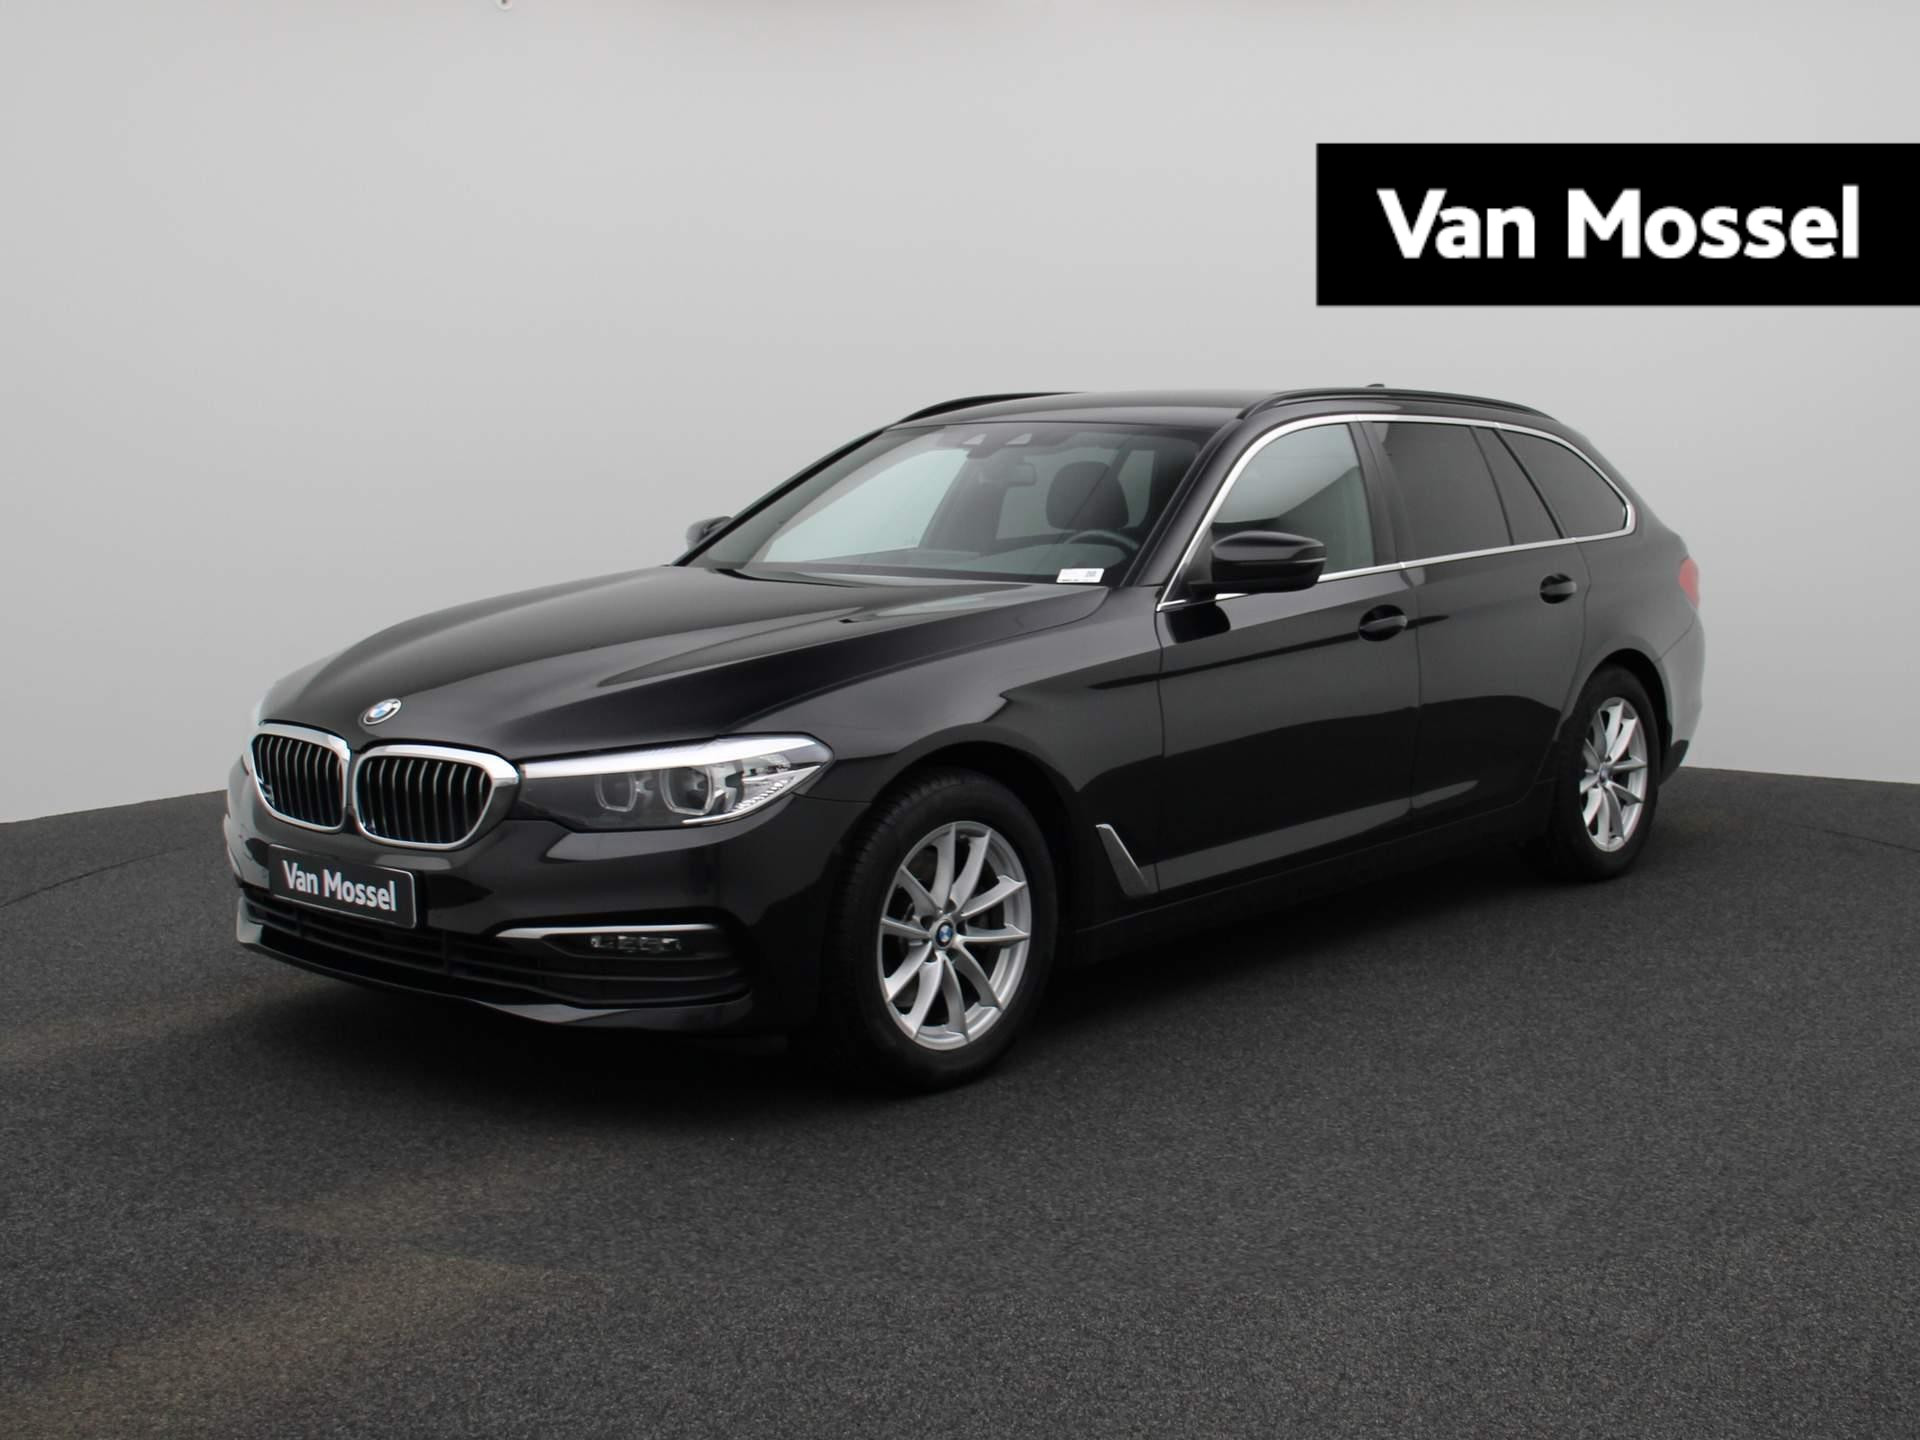 BMW 5 Serie Touring 520d Executive | Automaat | Apple Carplay/Android Auto | Ambiance Verlichting | Elektrisch Achterklep | LED | Camera | Stoelverwarming | Park Assist Pack | Live Cockpit Professional |